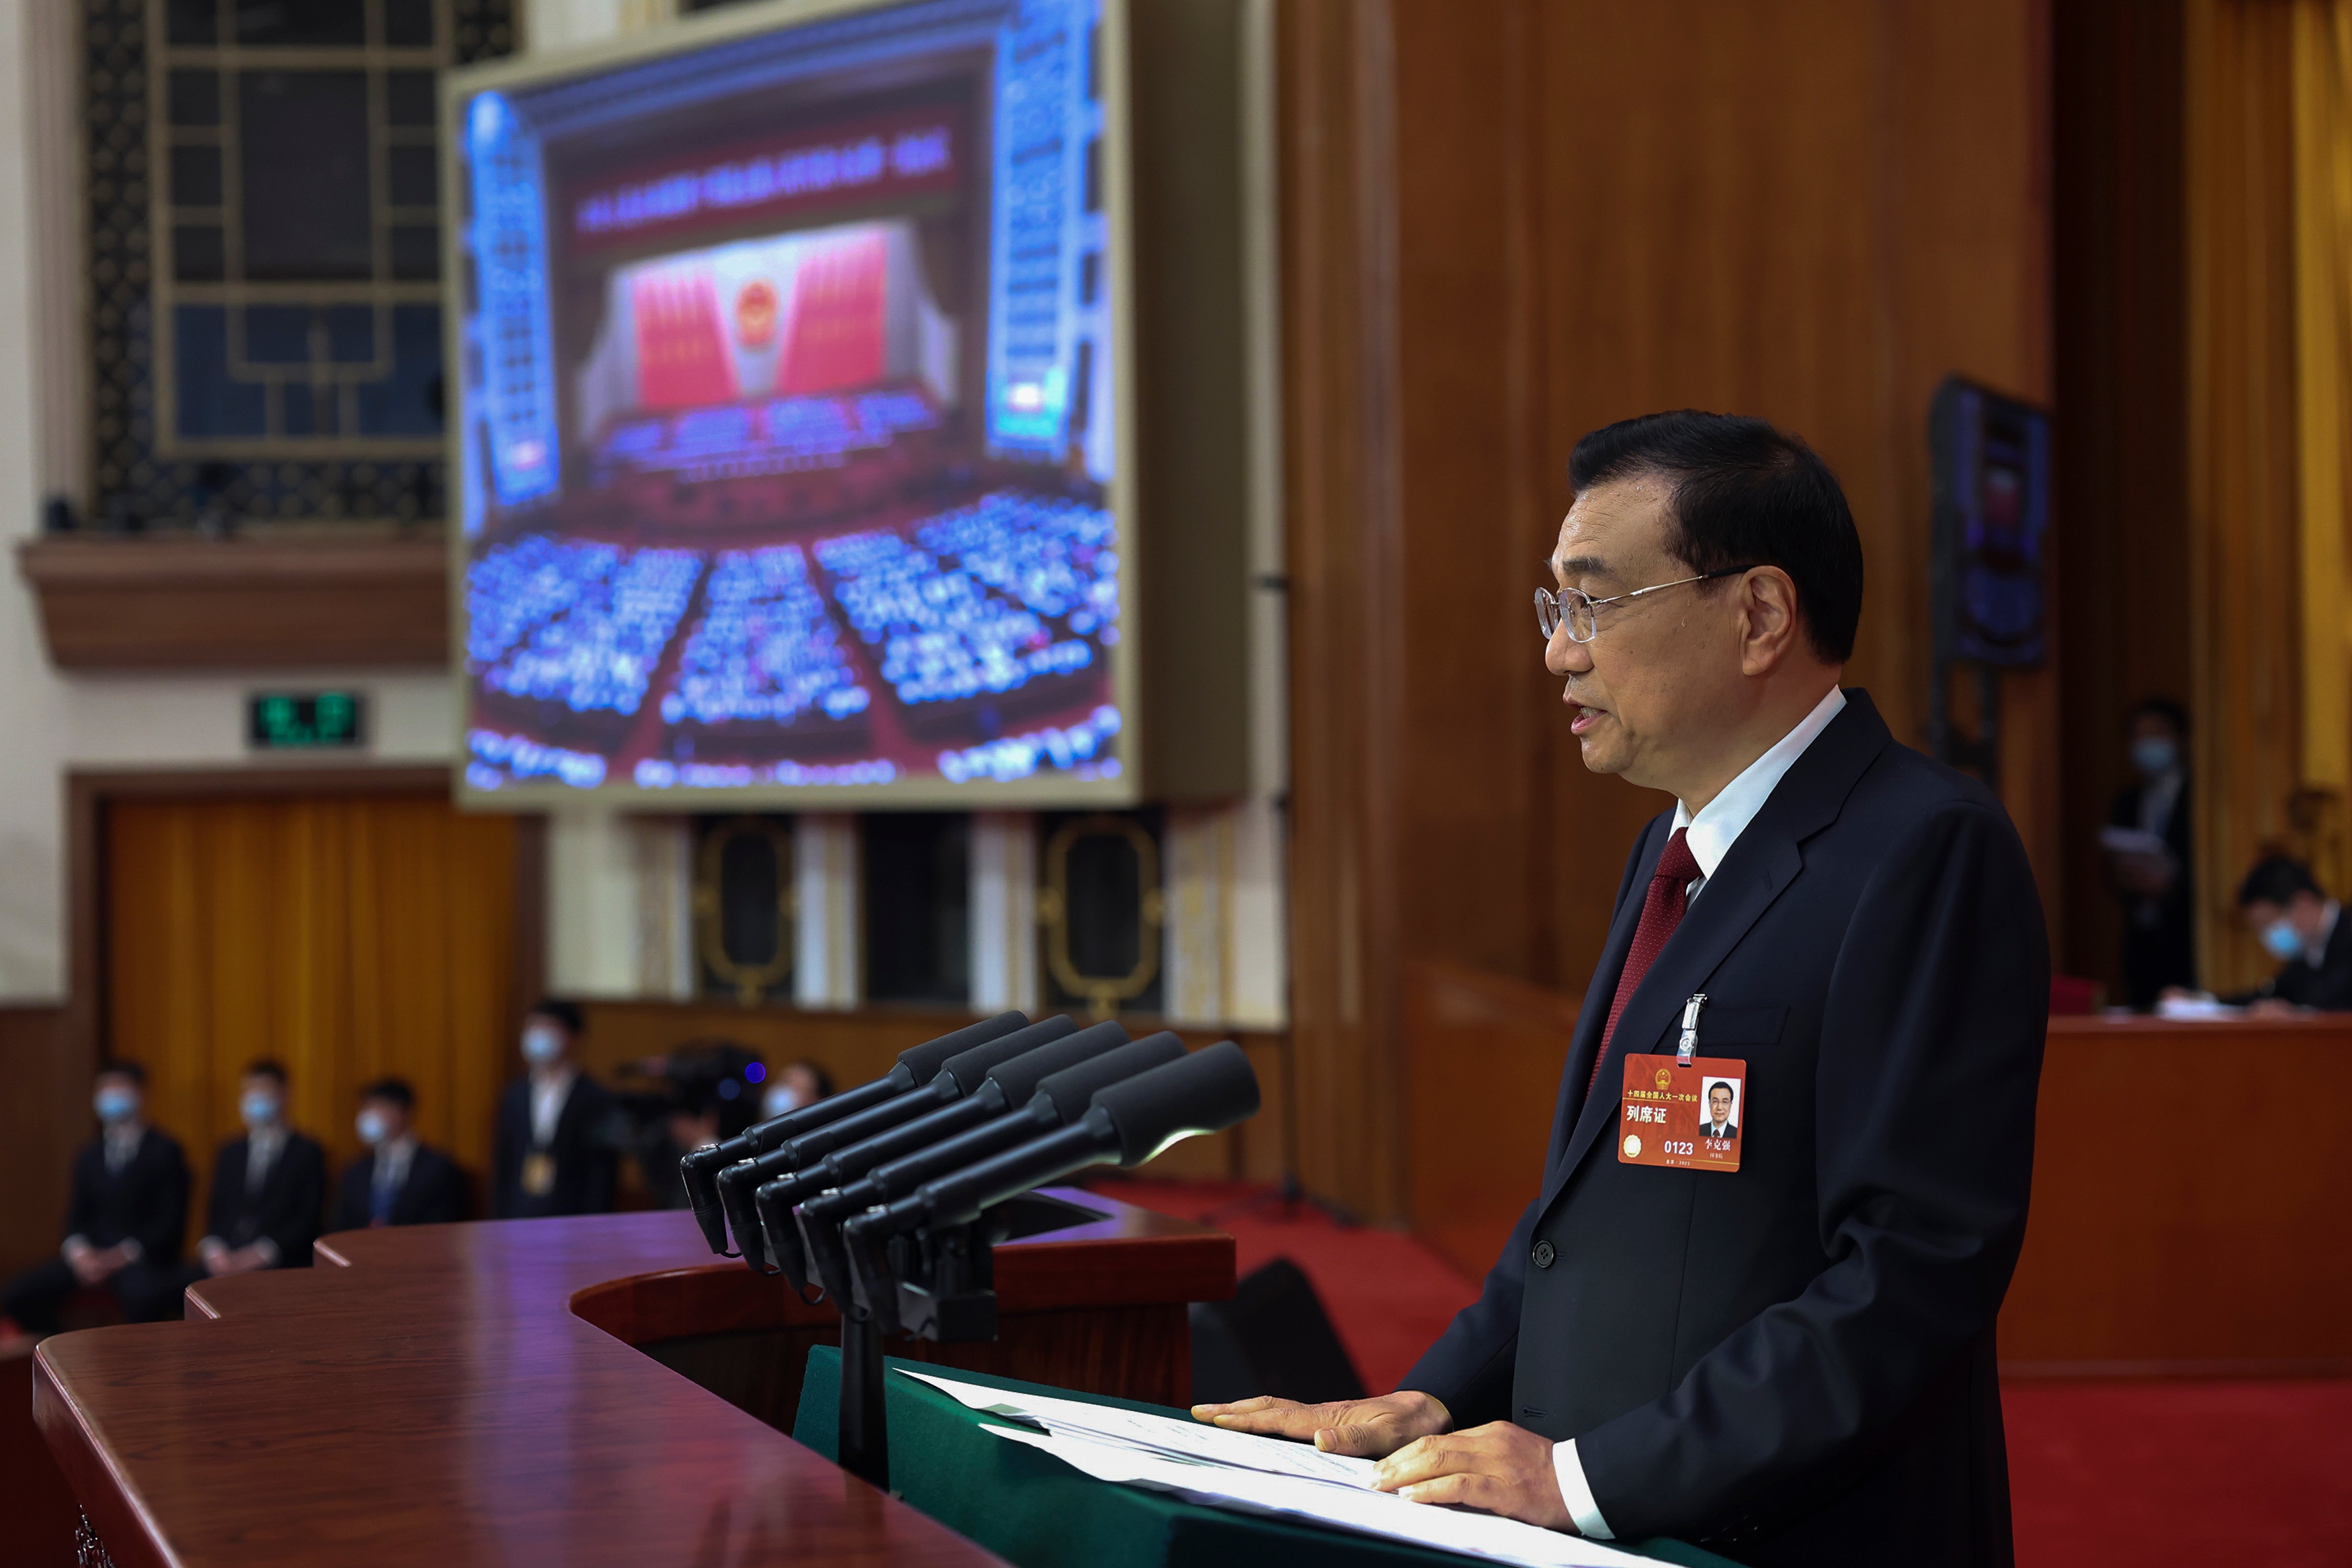 Chinese Premier Li Keqiang delivers a government work report during the opening session of China's National People's Congress at the Great Hall of the People in Beijing, Sunday, March 5, 2023. (Ju Peng—Xinhua News Agency/AP)